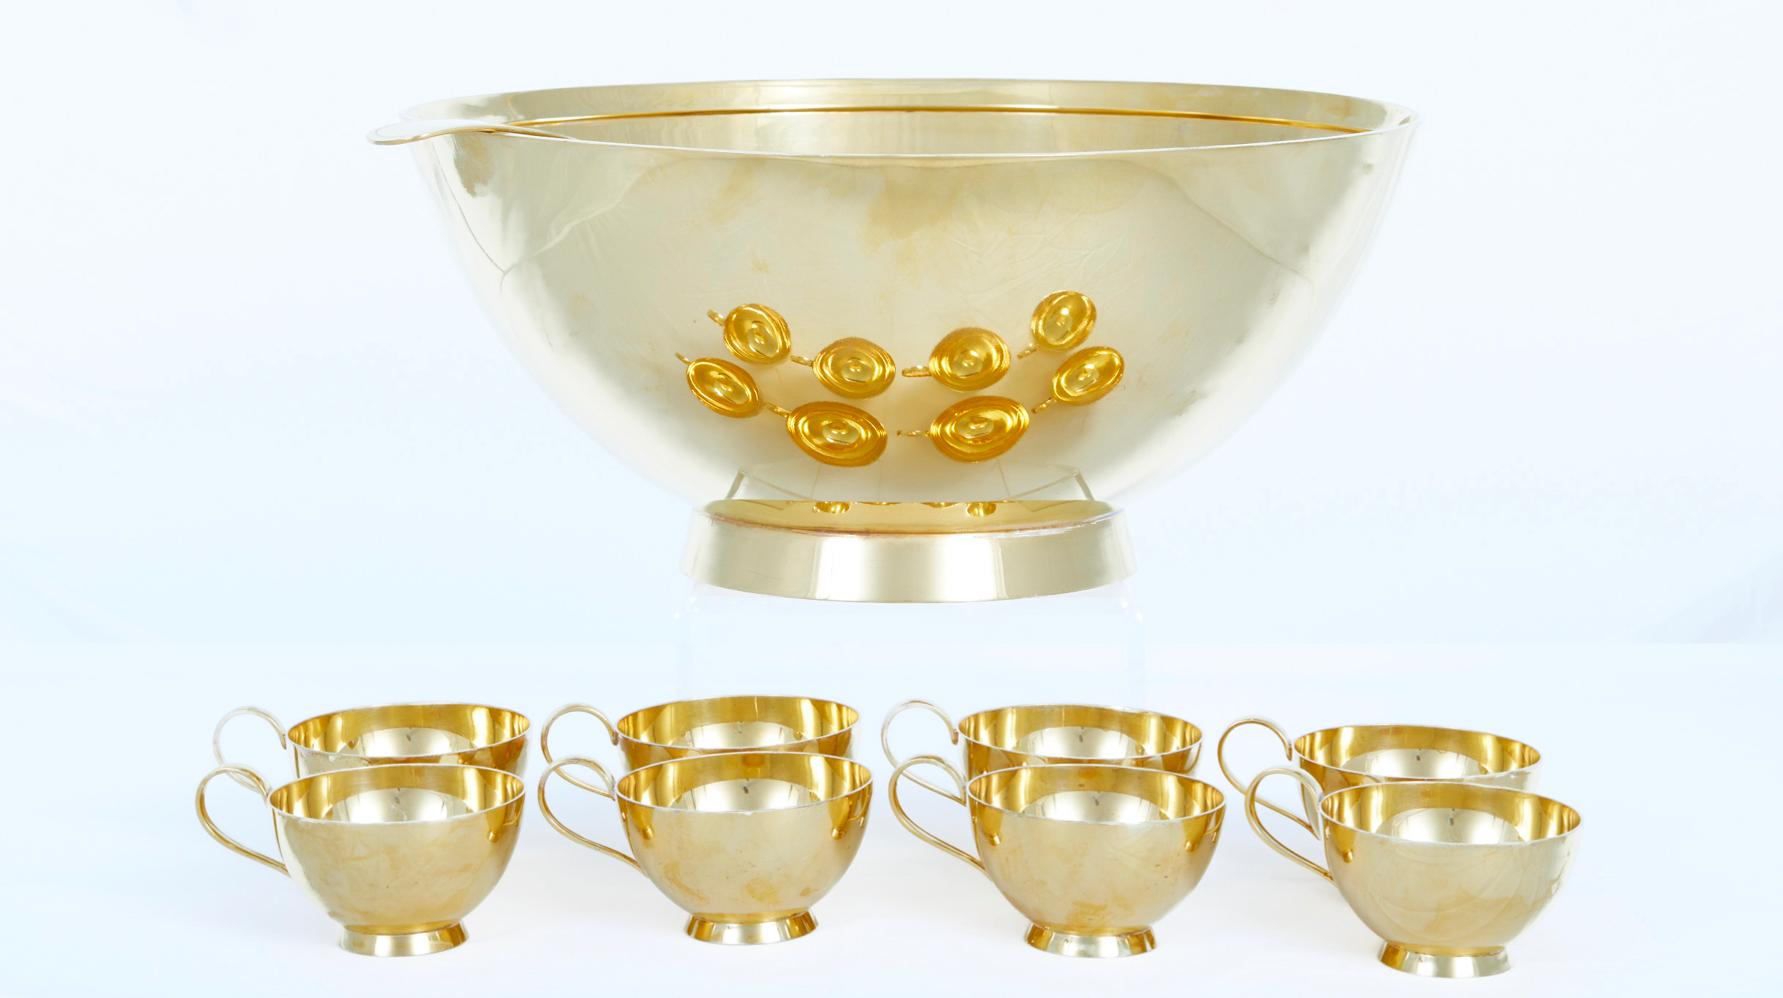 Tiffany & Co. Sterling Silver / Gilt Punch Bowl Service / 8 People For Sale 9